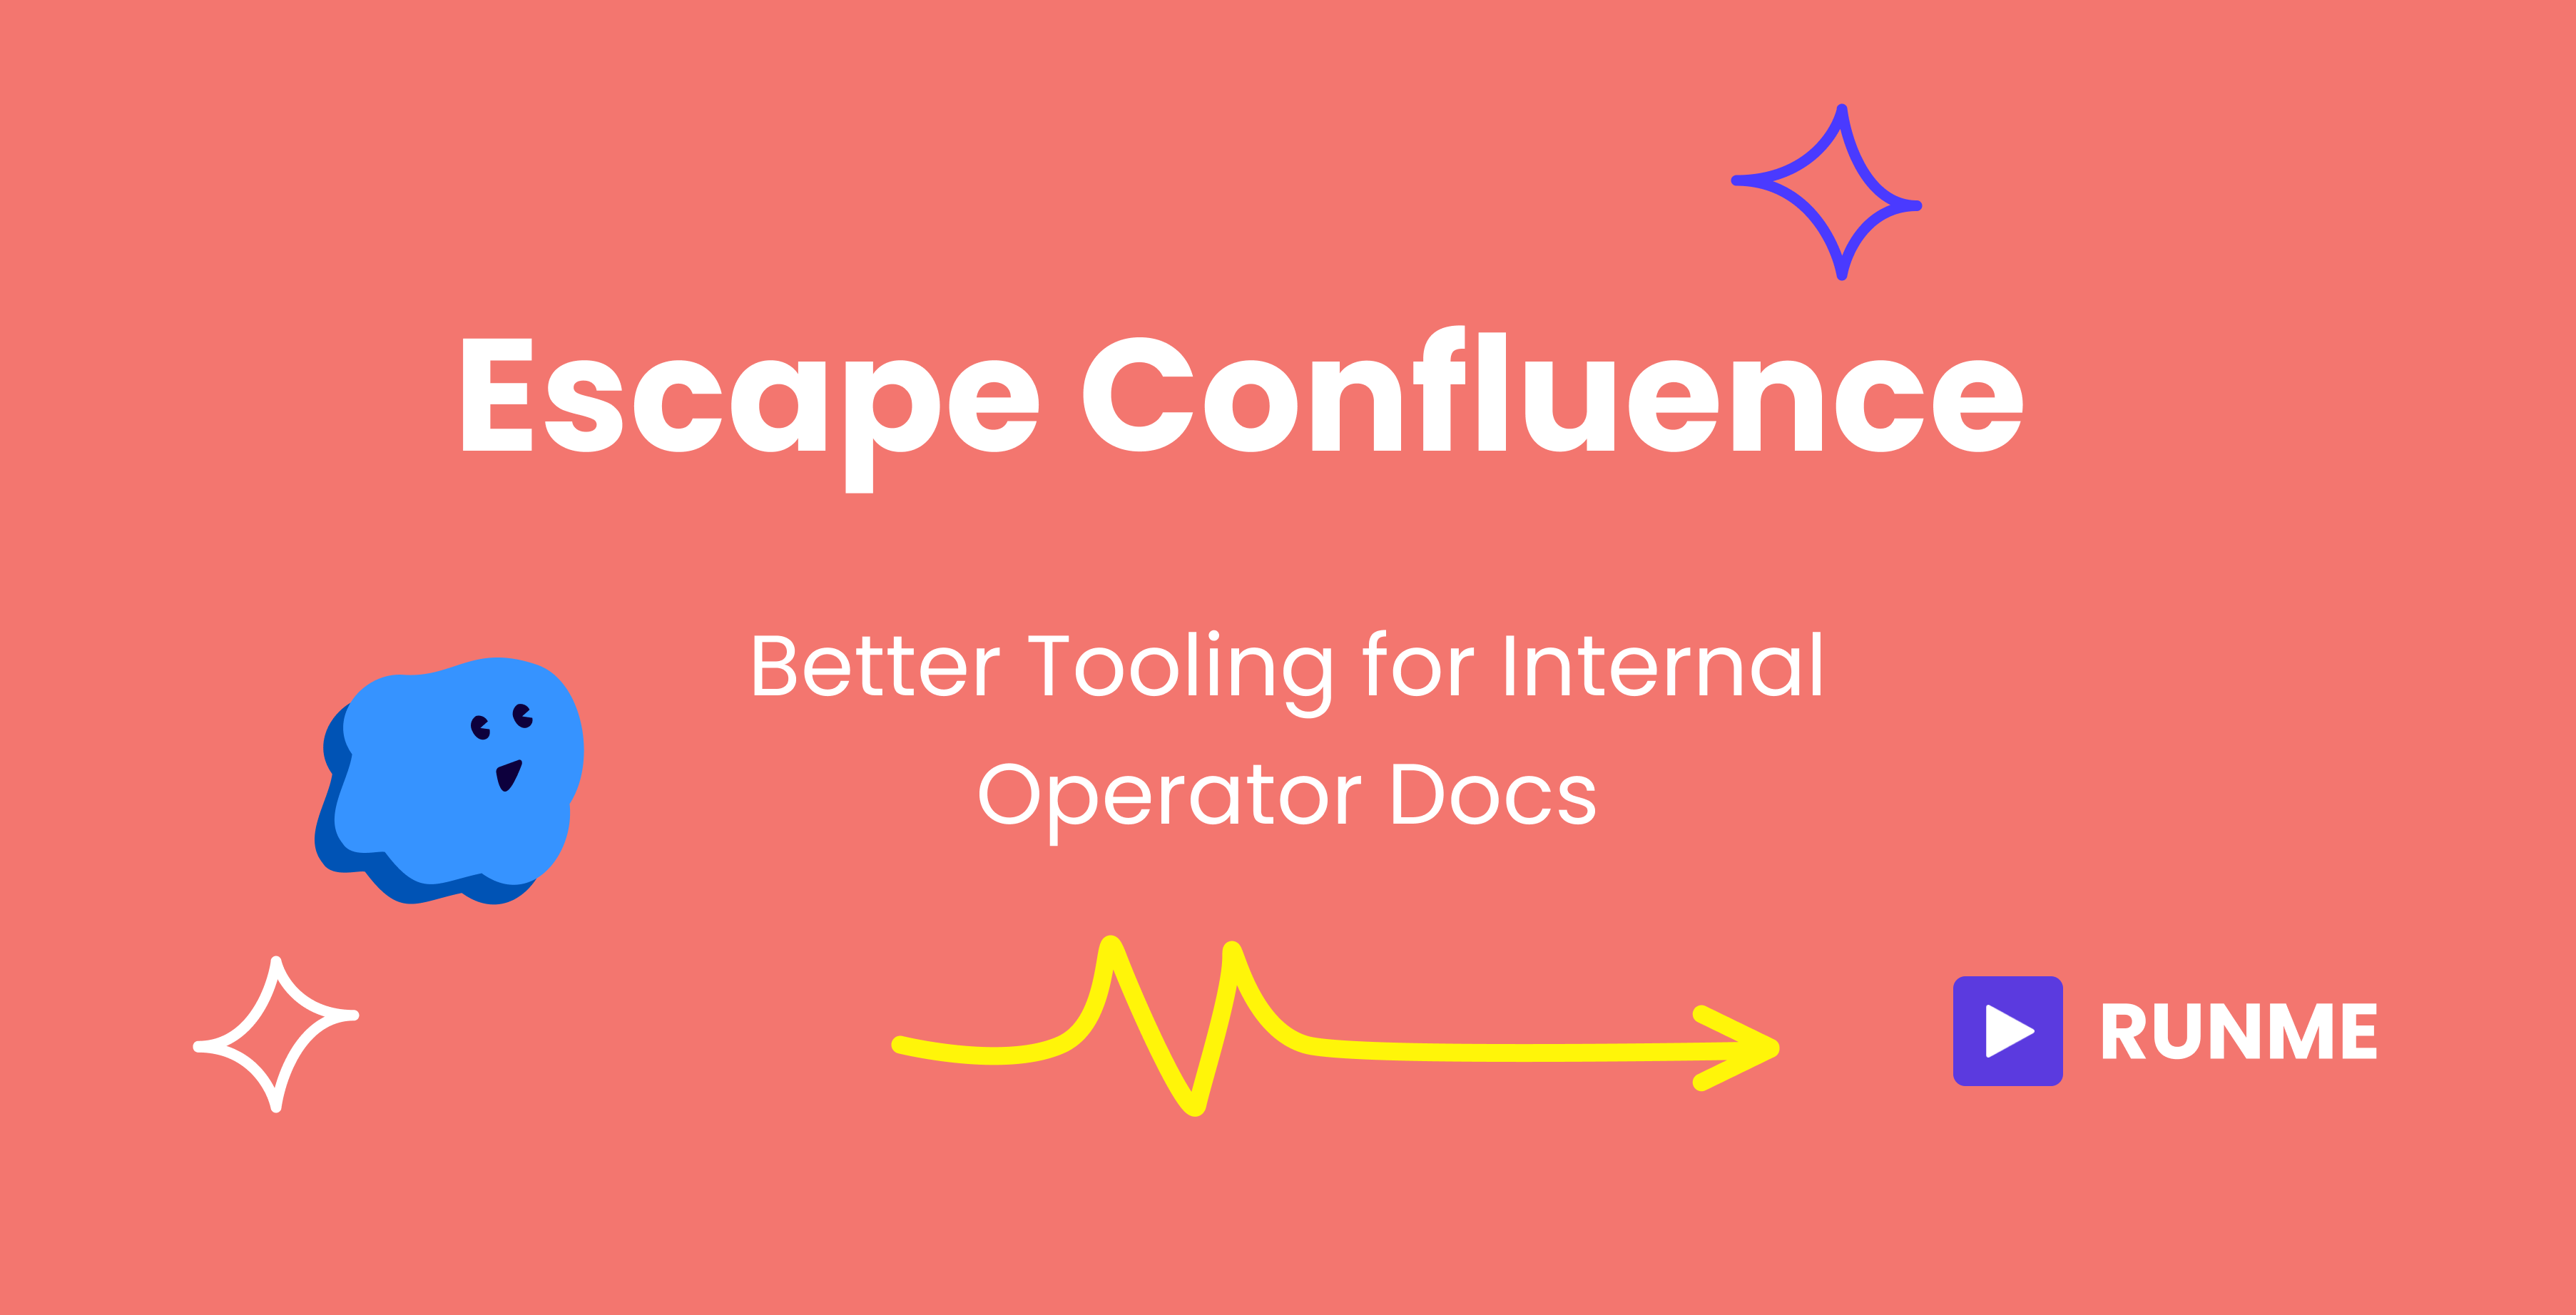 Escape Confluence: Better Tooling for Internal Operator Docs